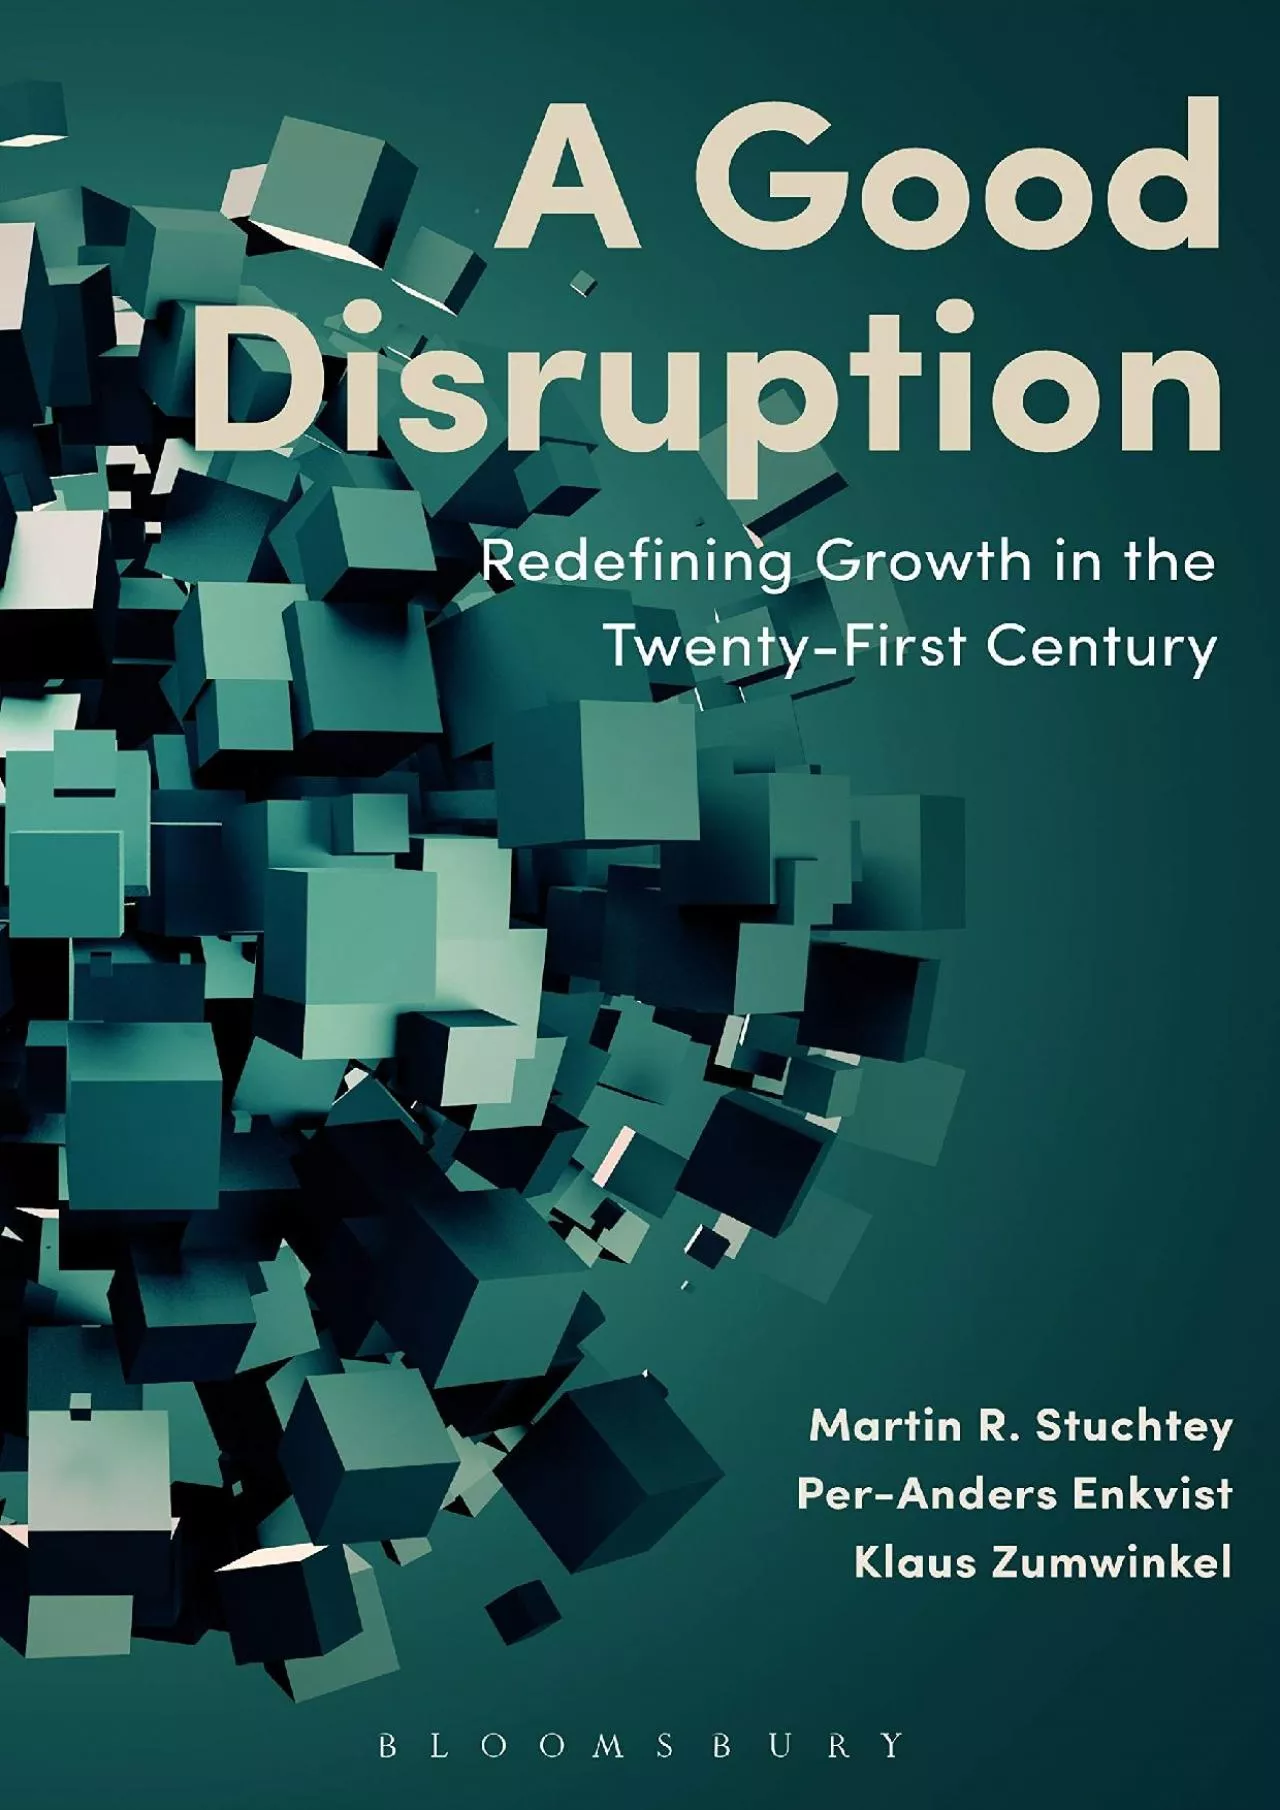 (DOWNLOAD)-A Good Disruption: Redefining Growth in the Twenty-First Century